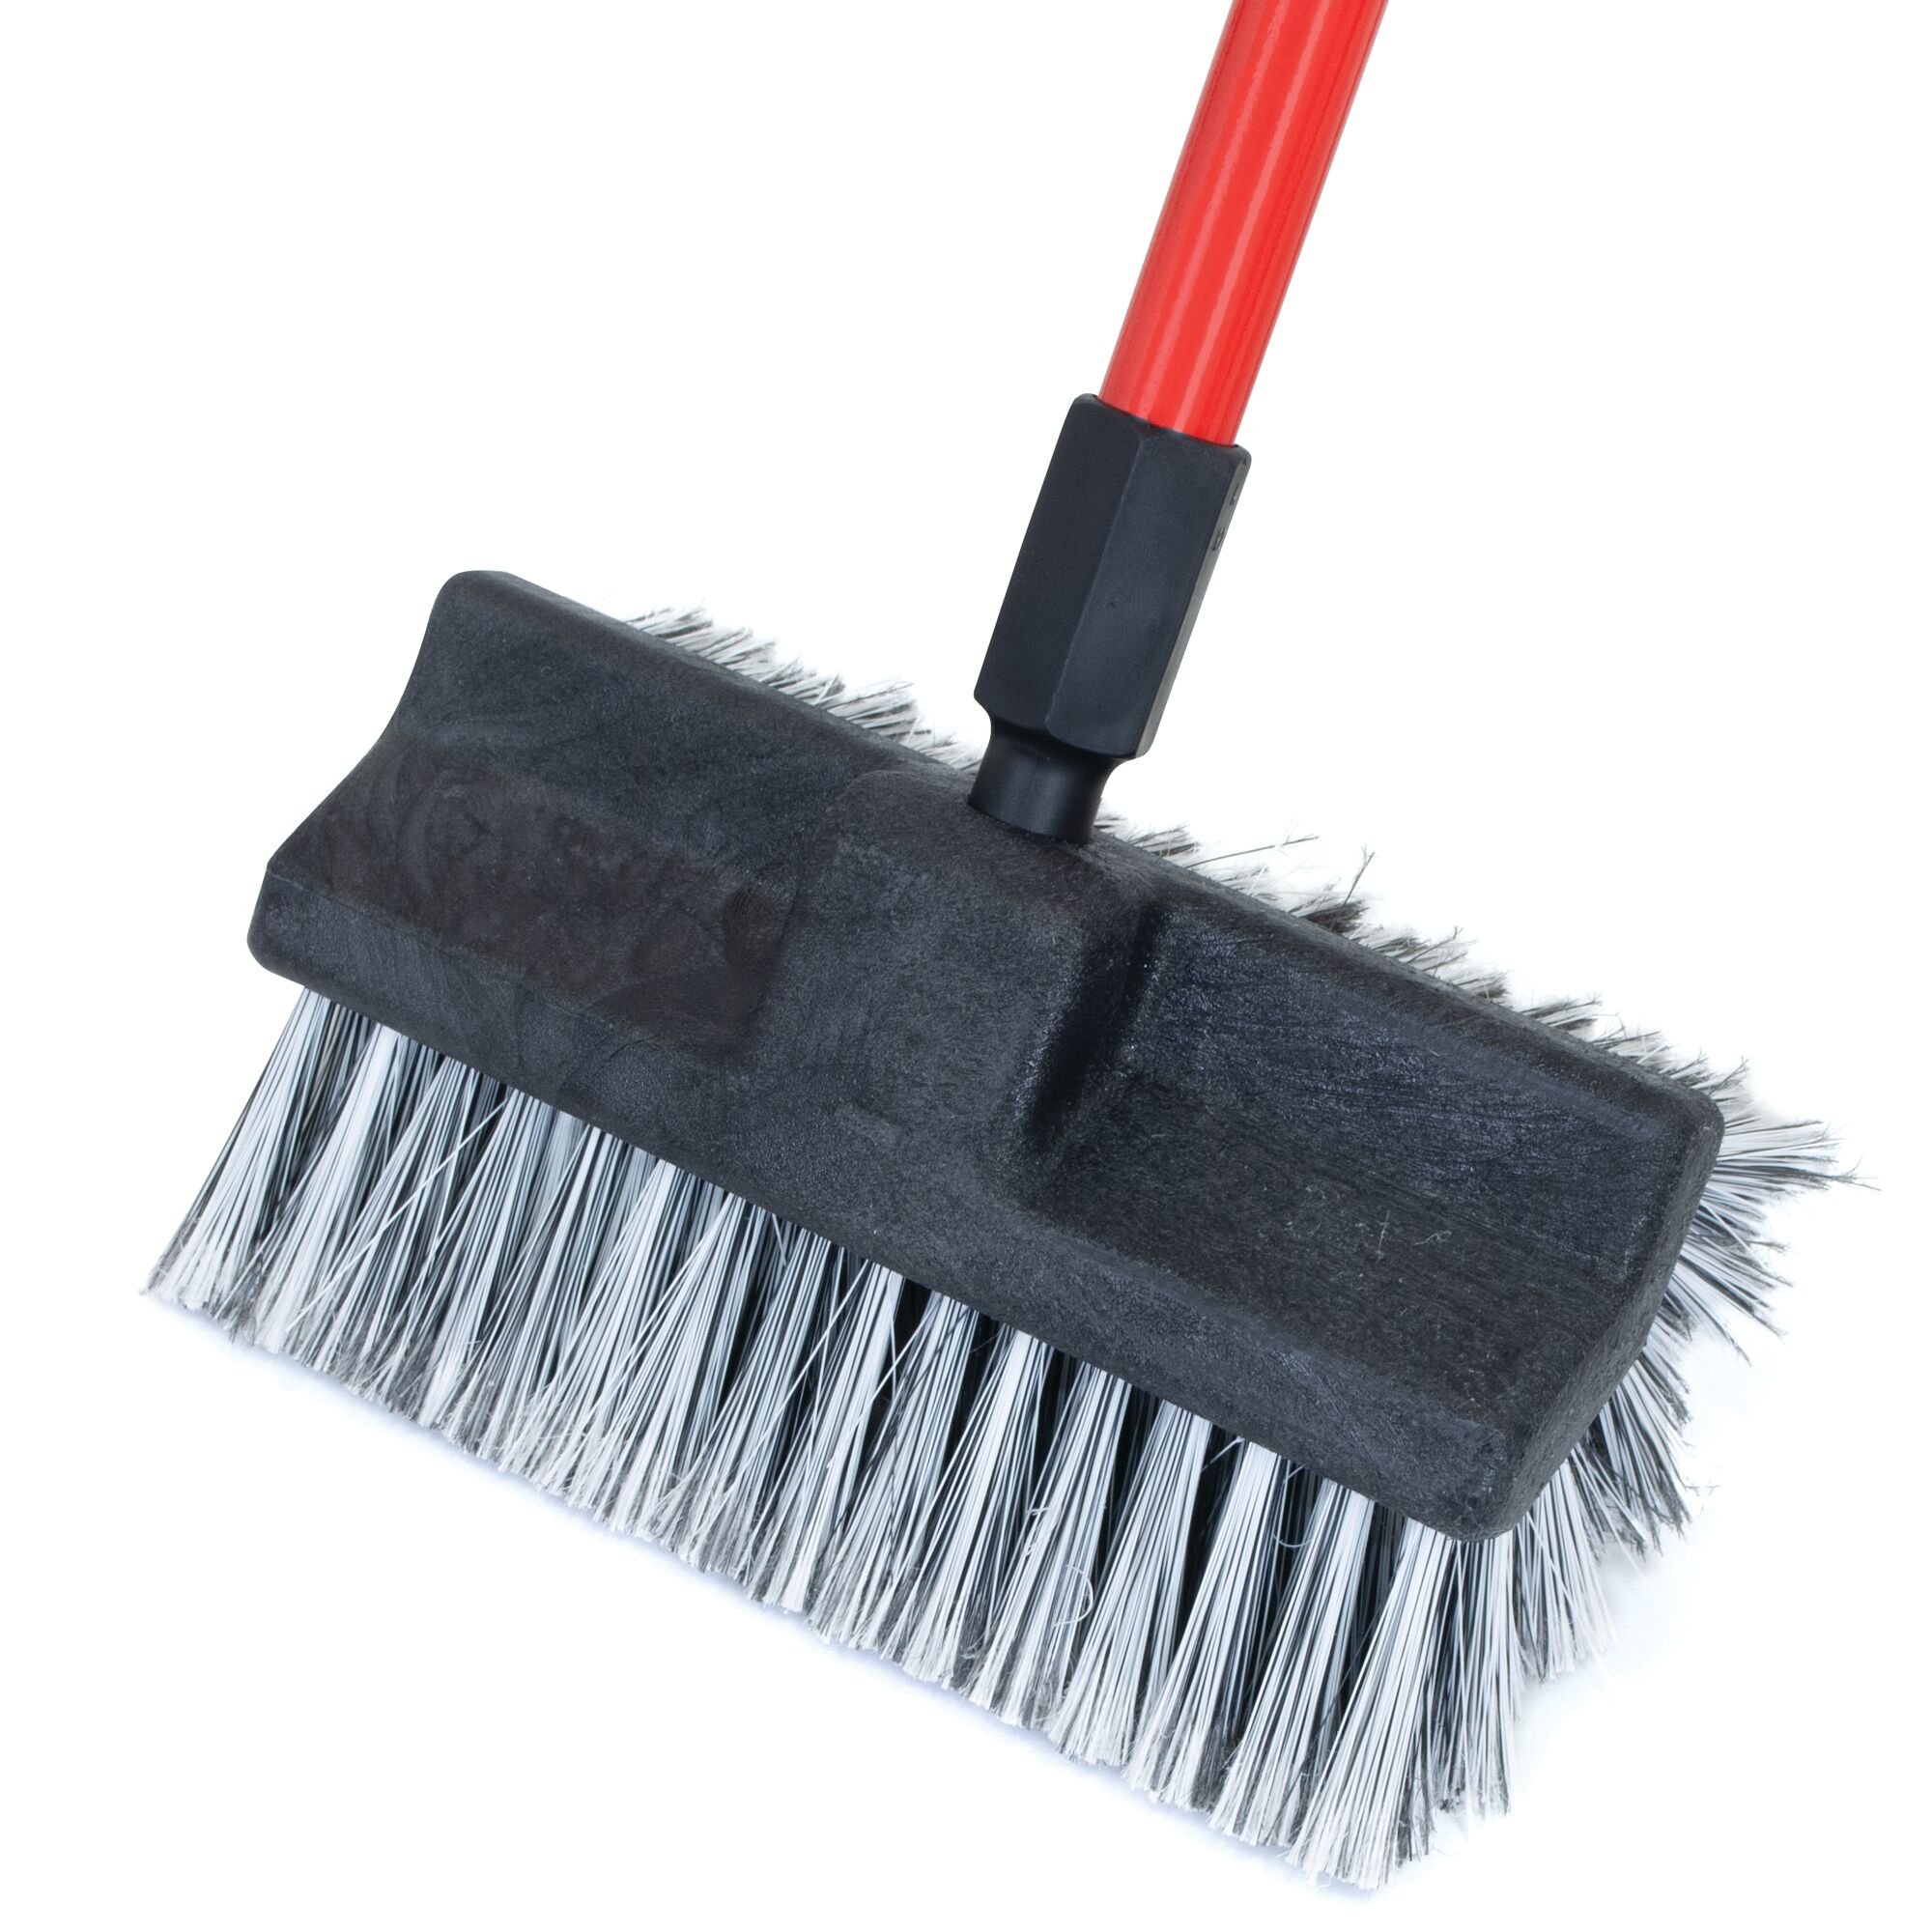 View of CRAFTSMAN 10-in All Surface Wash Brush on white background